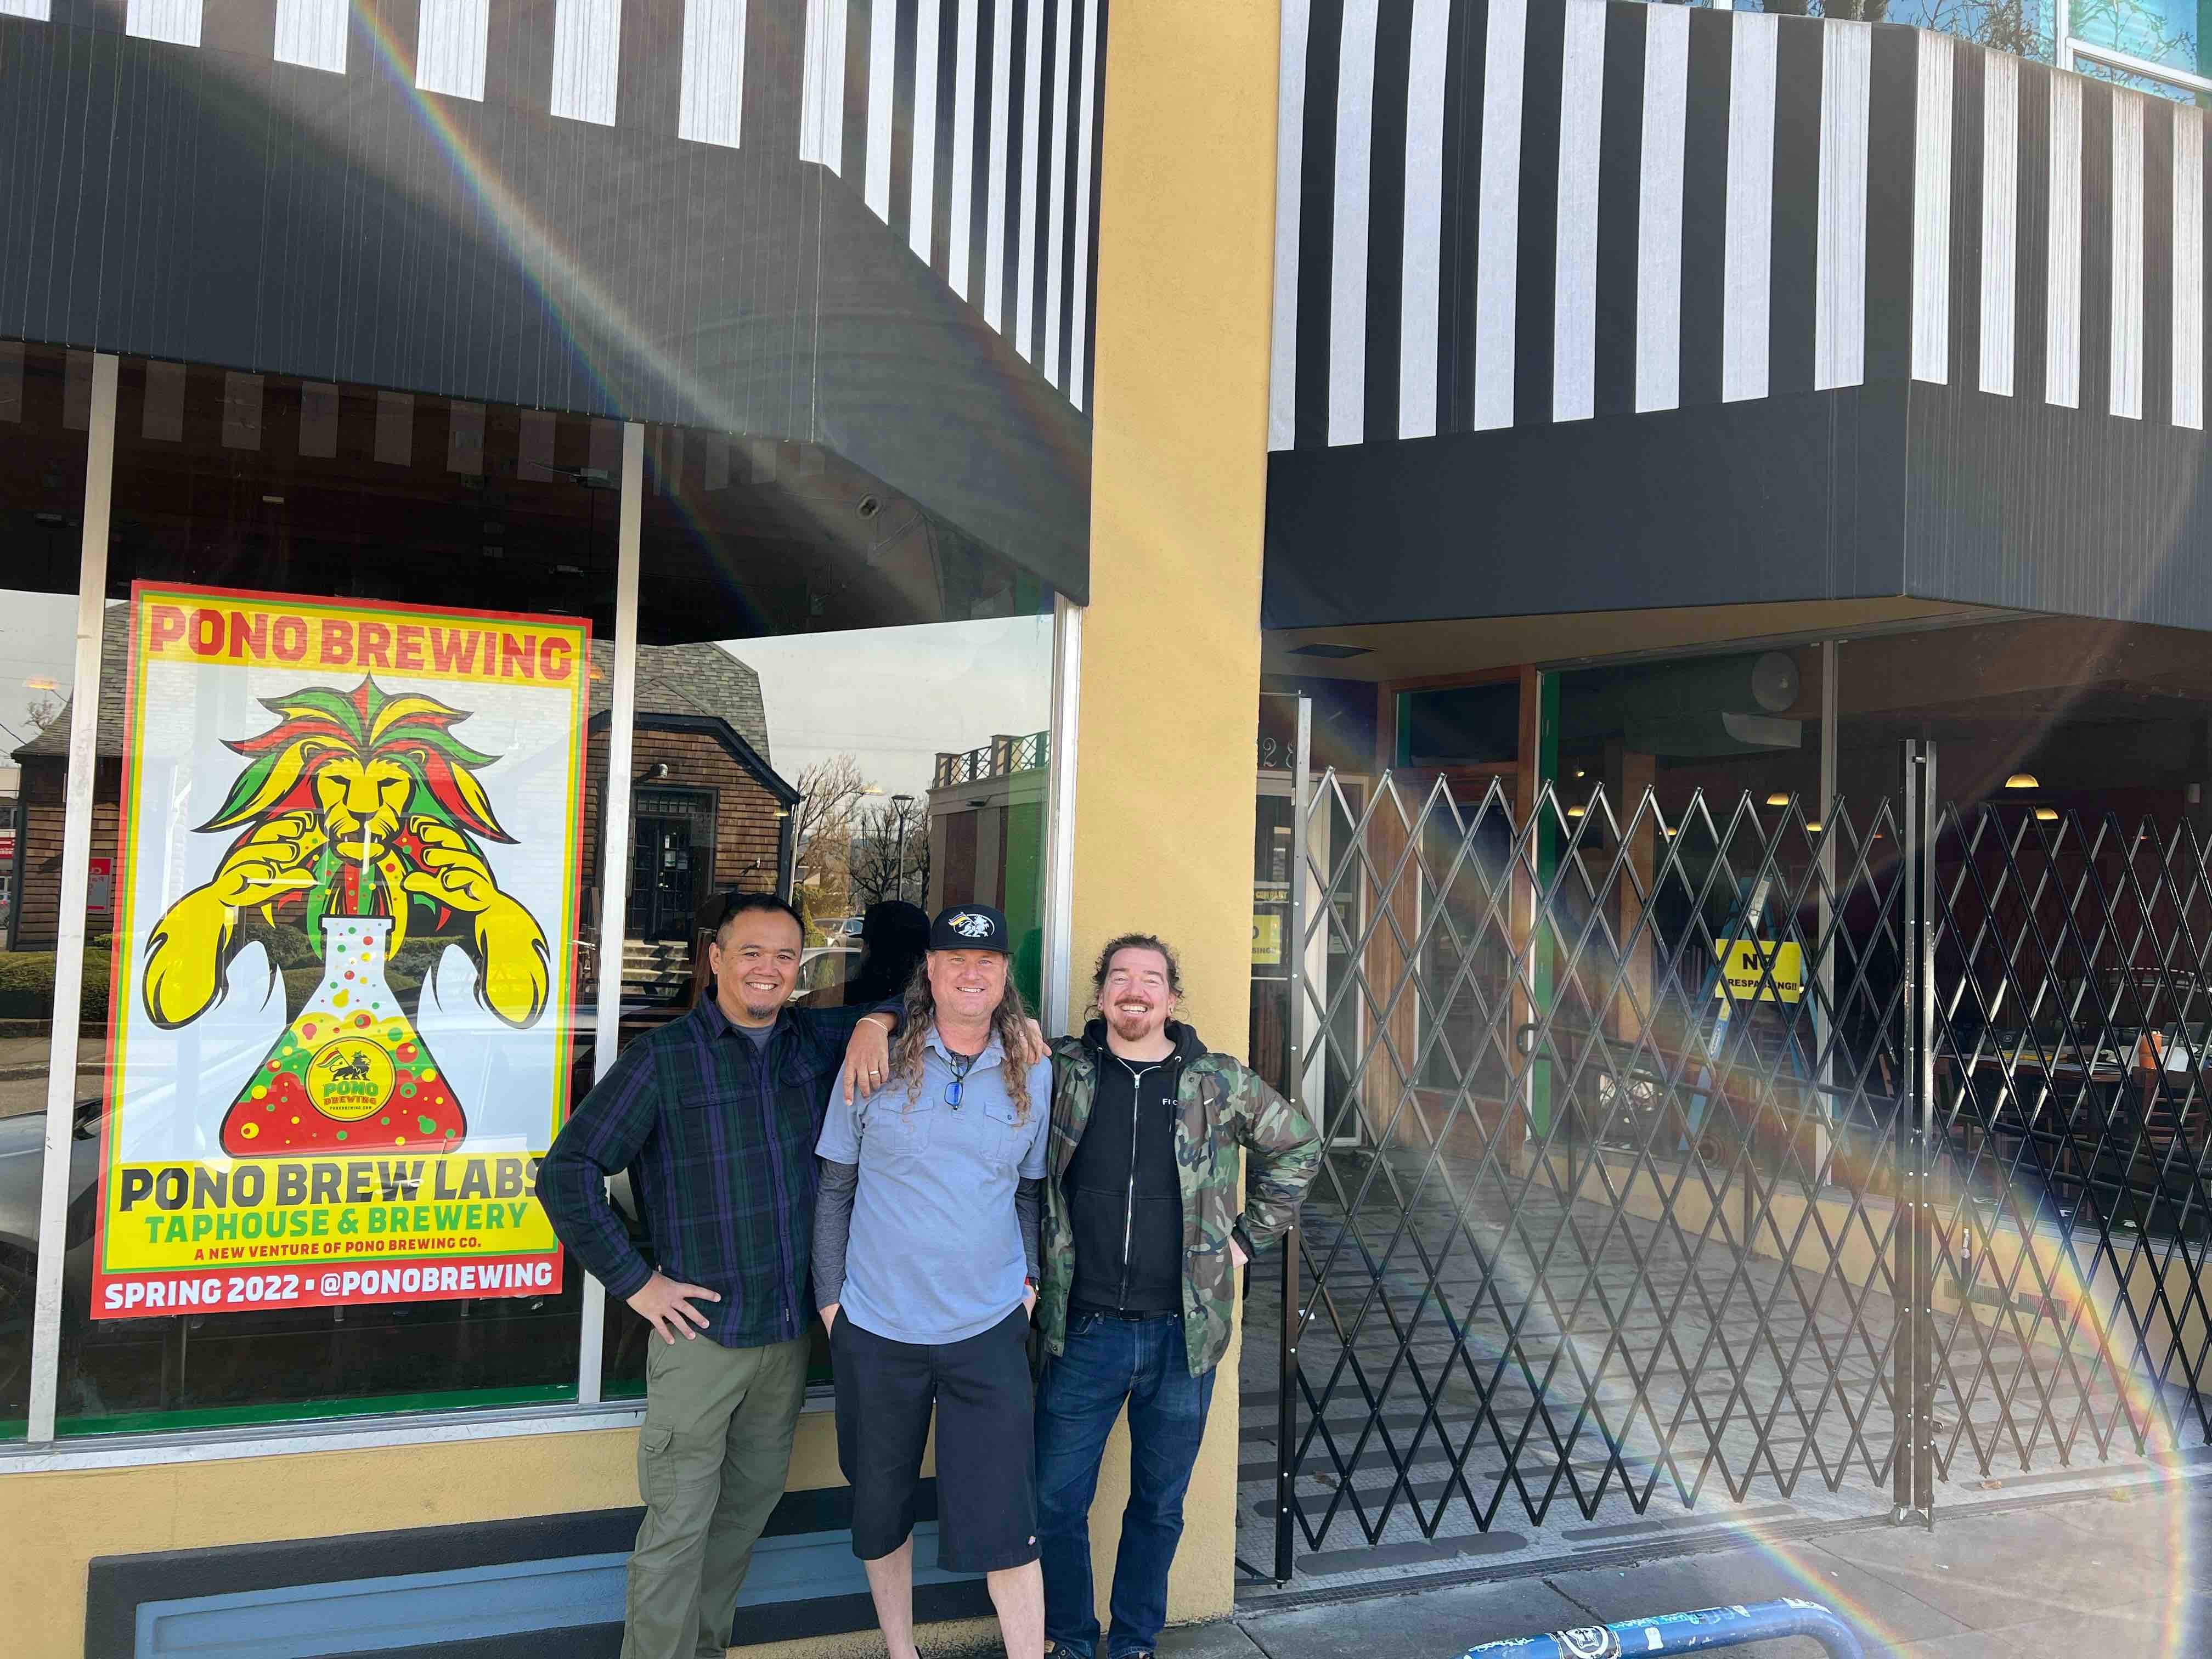 image of Byron Sina, Larry Clouser, and Erick Russ in front of the forthcoming Pono Brew Labs courtesy of Pono Brewing